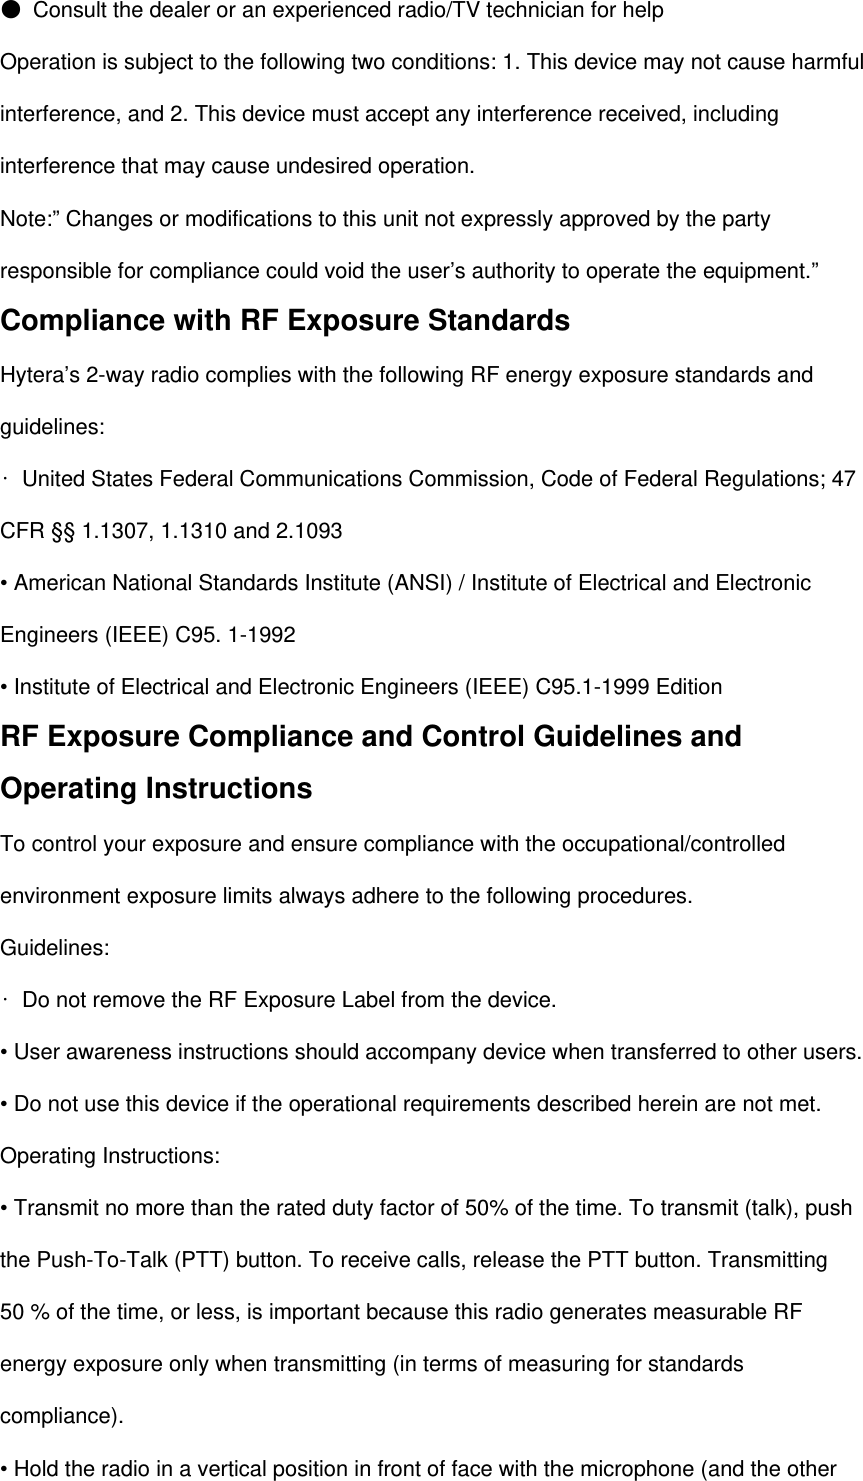  ● Consult the dealer or an experienced radio/TV technician for help Operation is subject to the following two conditions: 1. This device may not cause harmful interference, and 2. This device must accept any interference received, including interference that may cause undesired operation. Note:” Changes or modifications to this unit not expressly approved by the party responsible for compliance could void the user’s authority to operate the equipment.” Compliance with RF Exposure Standards Hytera’s 2-way radio complies with the following RF energy exposure standards and guidelines: • United States Federal Communications Commission, Code of Federal Regulations; 47 CFR §§ 1.1307, 1.1310 and 2.1093 • American National Standards Institute (ANSI) / Institute of Electrical and Electronic Engineers (IEEE) C95. 1-1992 • Institute of Electrical and Electronic Engineers (IEEE) C95.1-1999 Edition RF Exposure Compliance and Control Guidelines and Operating Instructions To control your exposure and ensure compliance with the occupational/controlled environment exposure limits always adhere to the following procedures. Guidelines: • Do not remove the RF Exposure Label from the device. • User awareness instructions should accompany device when transferred to other users. • Do not use this device if the operational requirements described herein are not met. Operating Instructions: • Transmit no more than the rated duty factor of 50% of the time. To transmit (talk), push the Push-To-Talk (PTT) button. To receive calls, release the PTT button. Transmitting 50 % of the time, or less, is important because this radio generates measurable RF energy exposure only when transmitting (in terms of measuring for standards compliance). • Hold the radio in a vertical position in front of face with the microphone (and the other 